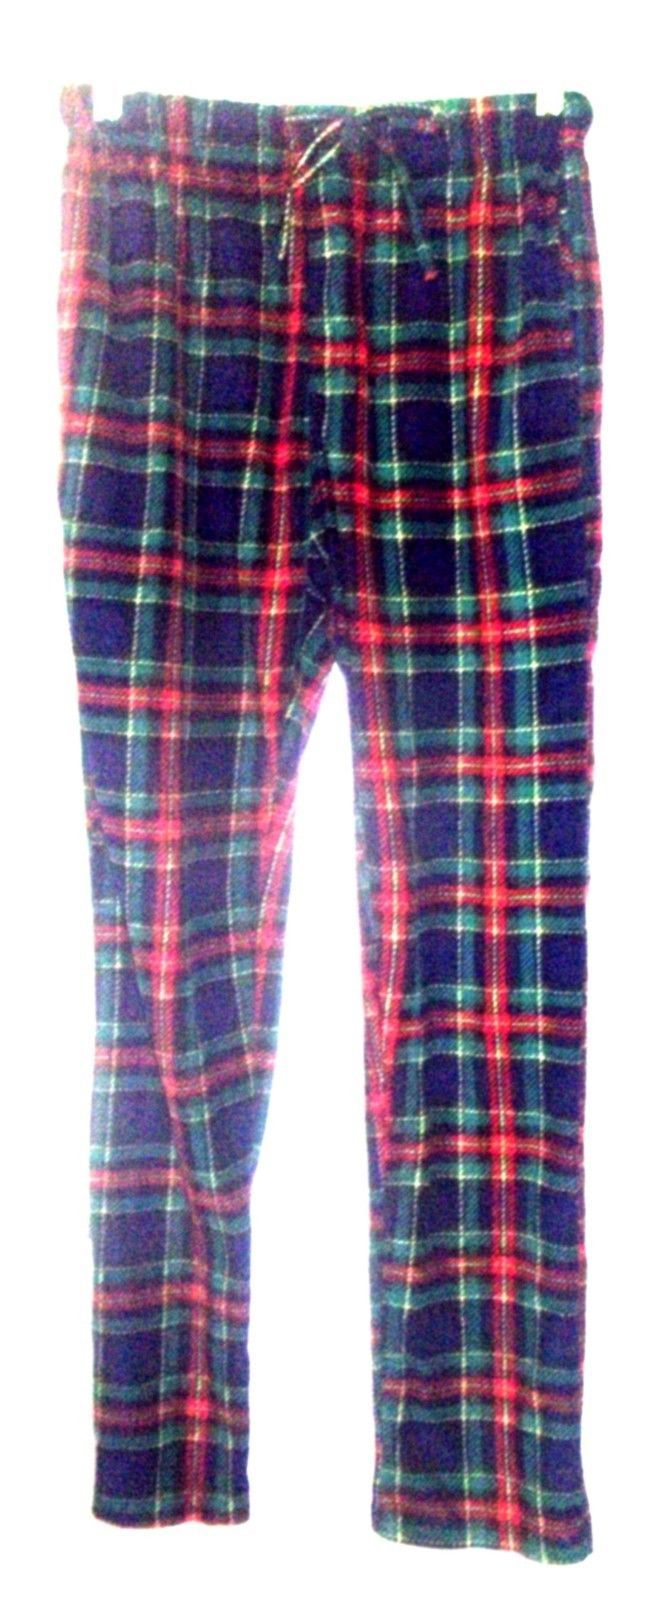 Bottoms Out Authentic Brand Navy Blue, Red & Green Plaid Pajama Pants ...